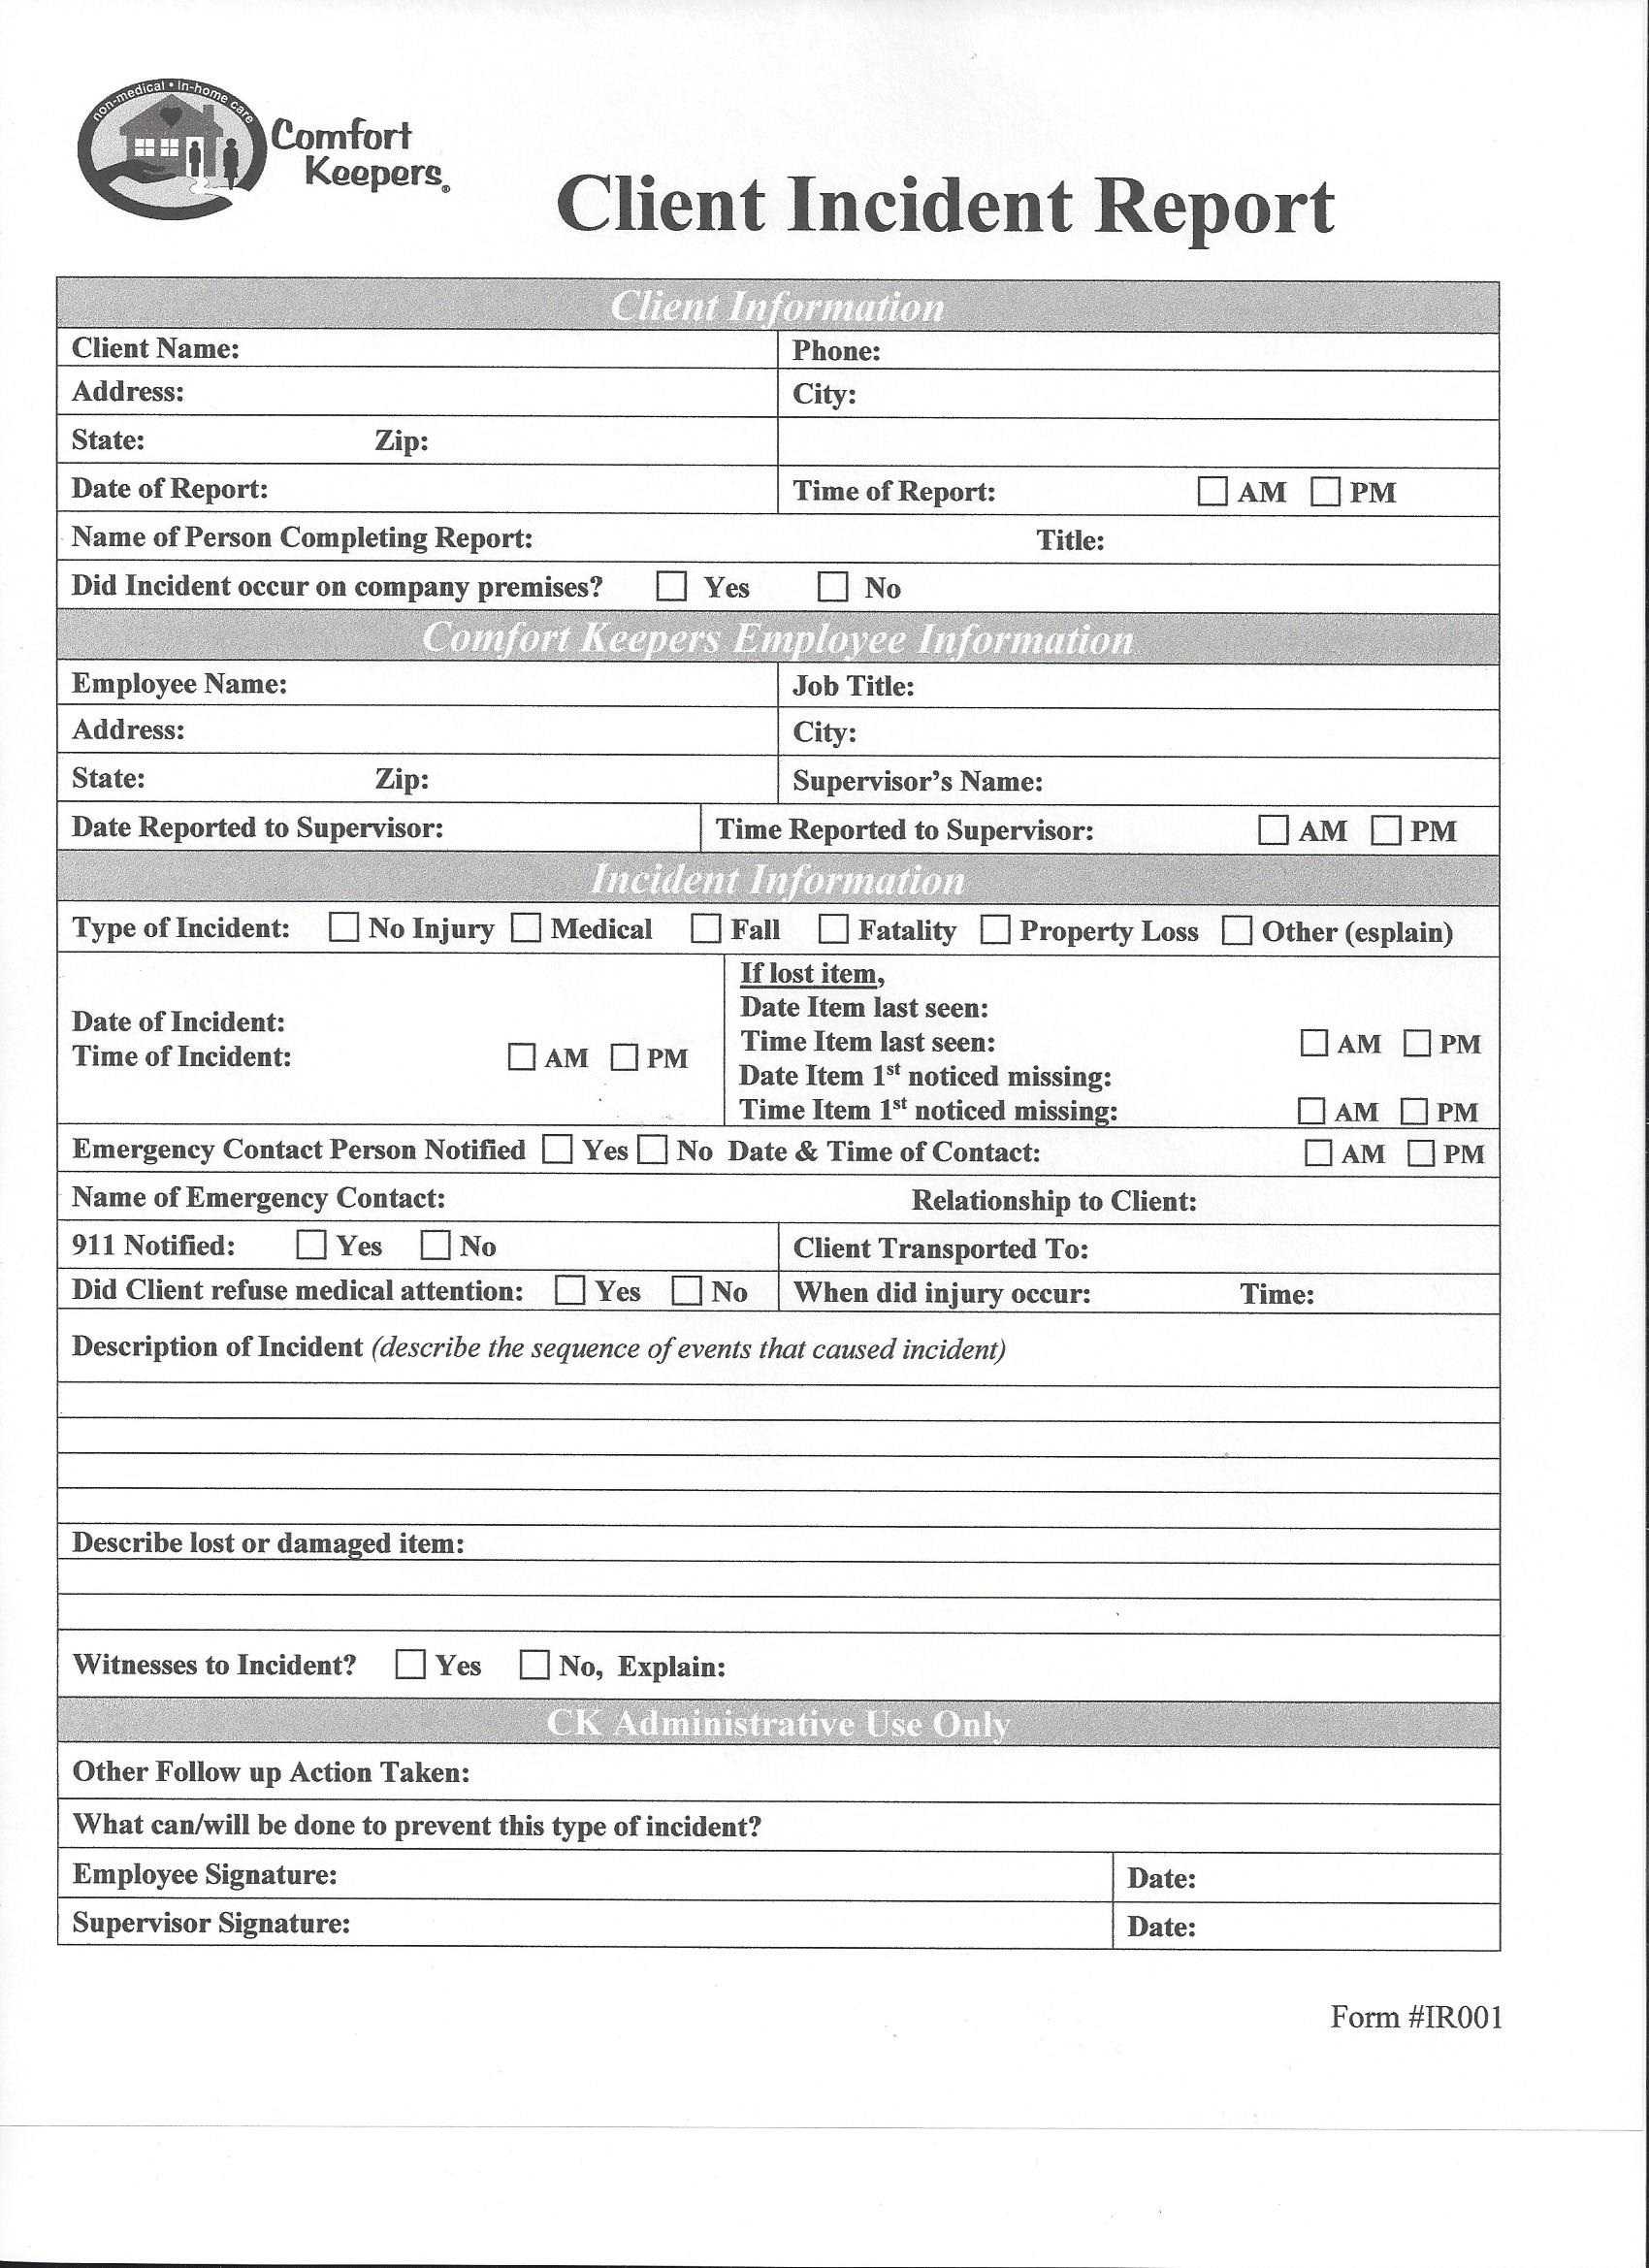 Injury Report Form Template Intended For Customer Incident Report Form Template